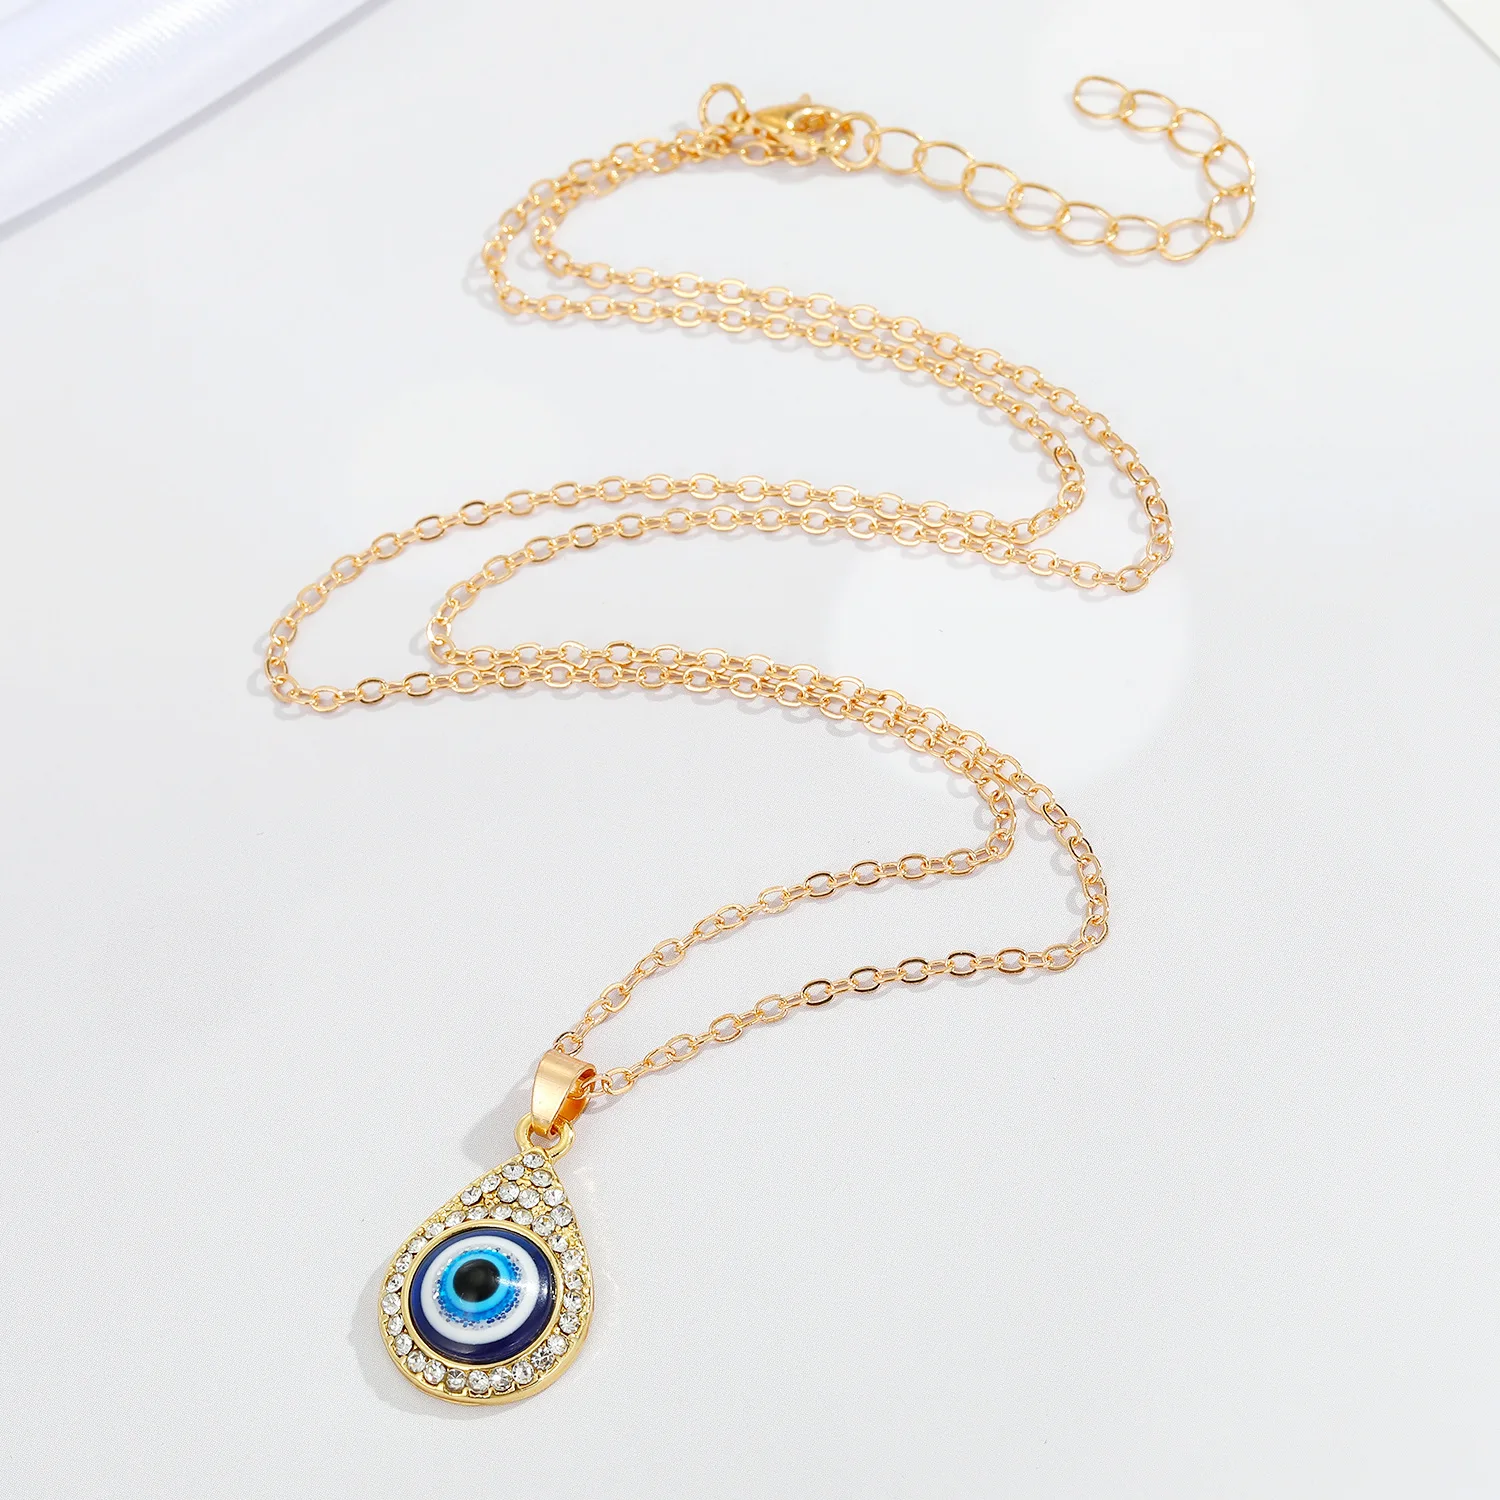 

20pcs Drill Waterdrop Turkey Evil Eye Necklace for Women Resin Blue Eye Pendant Choker Clavicle Chain Ethnic Lucky Jewelry